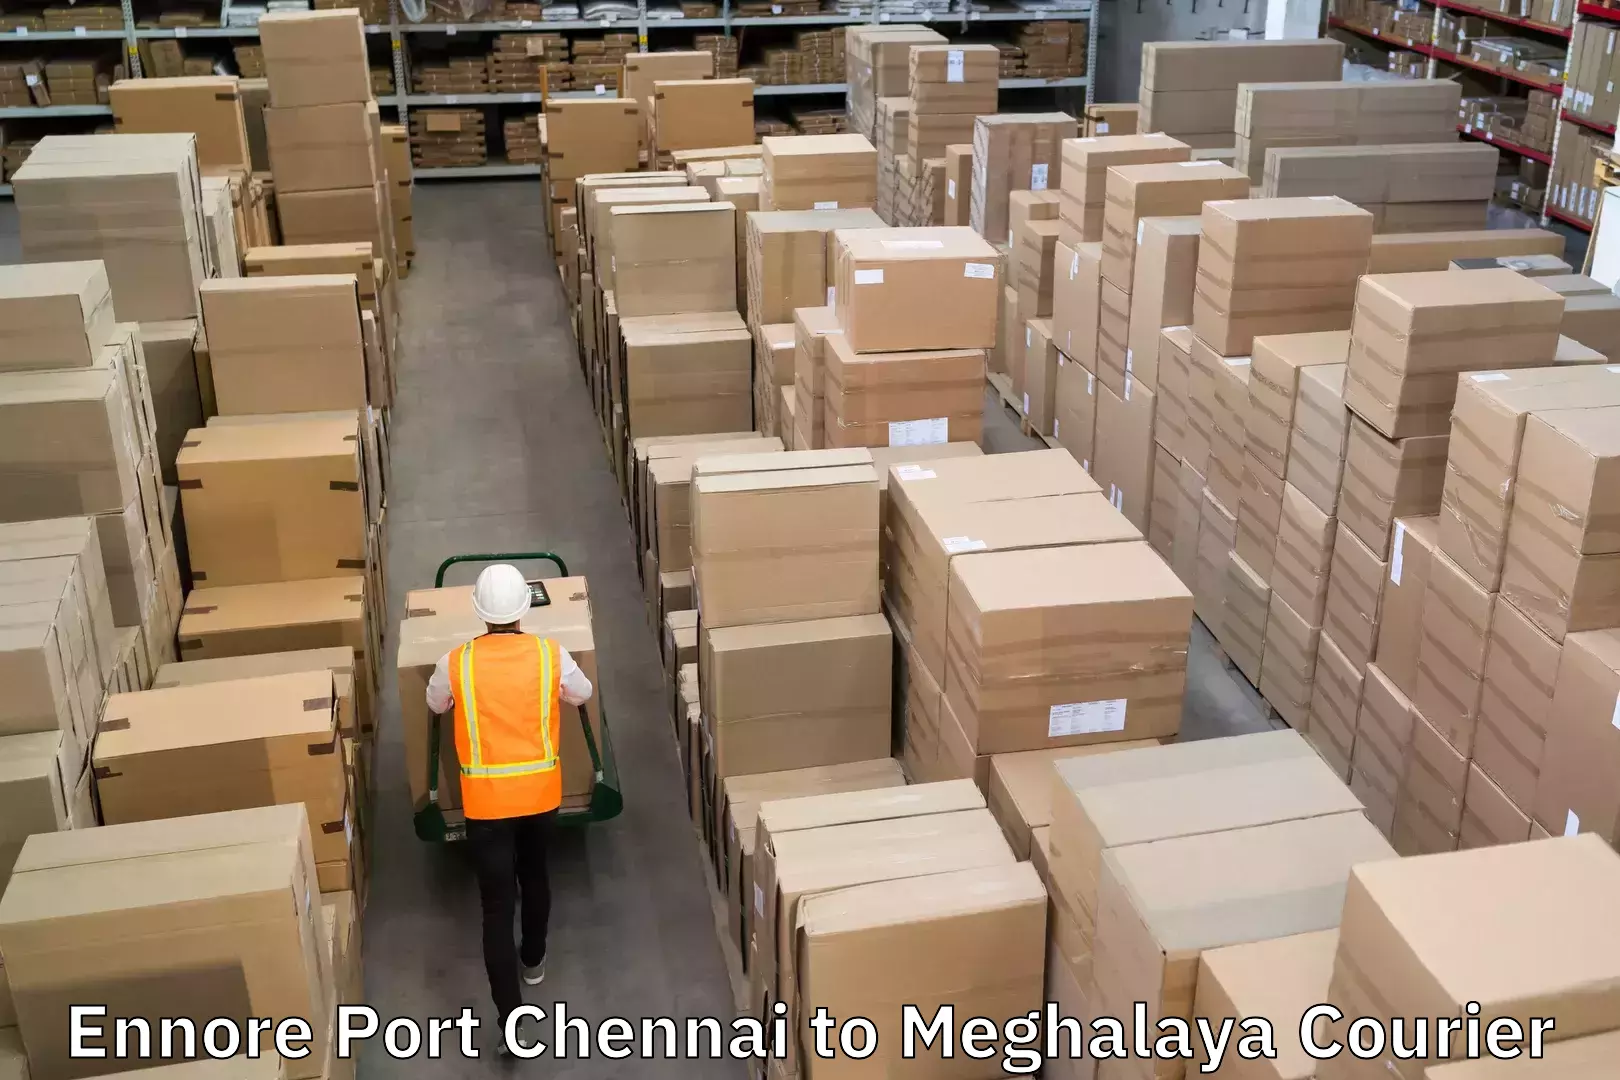 On-demand courier Ennore Port Chennai to Meghalaya